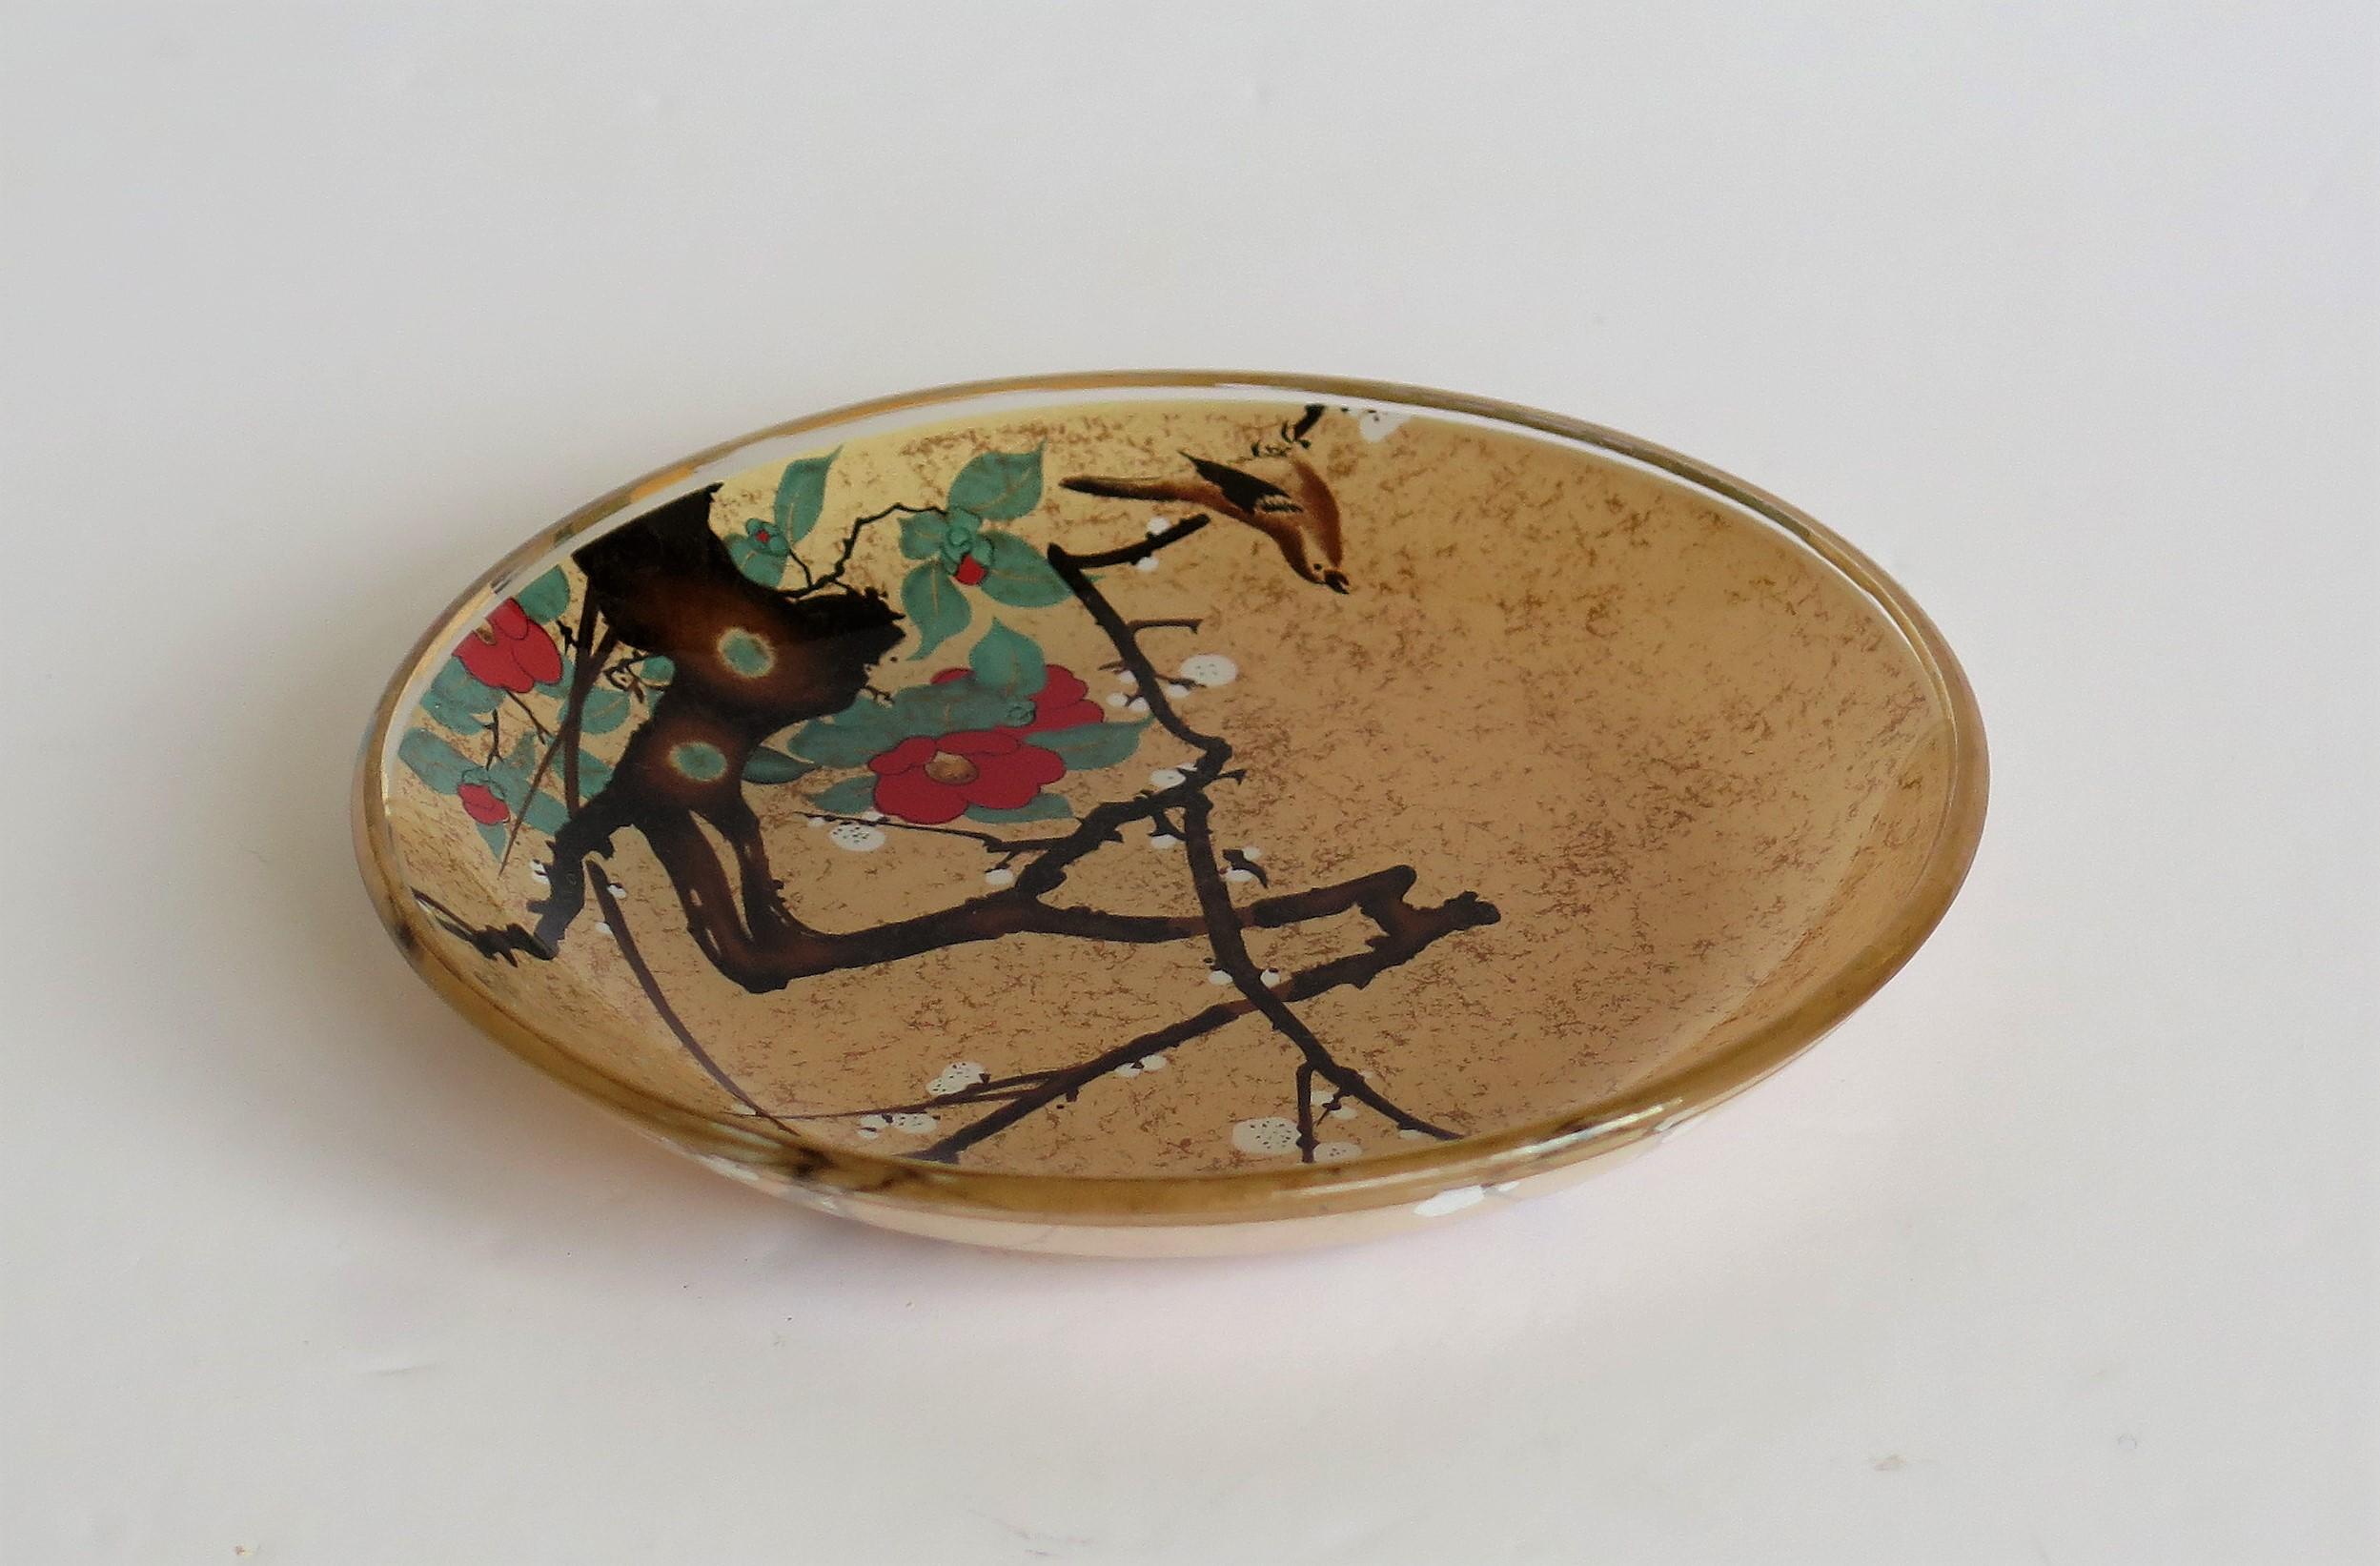 This is a small Japanese glass dish which is reverse hand painted in the Kakiemon style with a blossoming tree and perched bird which we date to the early 20th century, circa 1920

This is a small glass dish with a diameter of 4.5 inches.

It